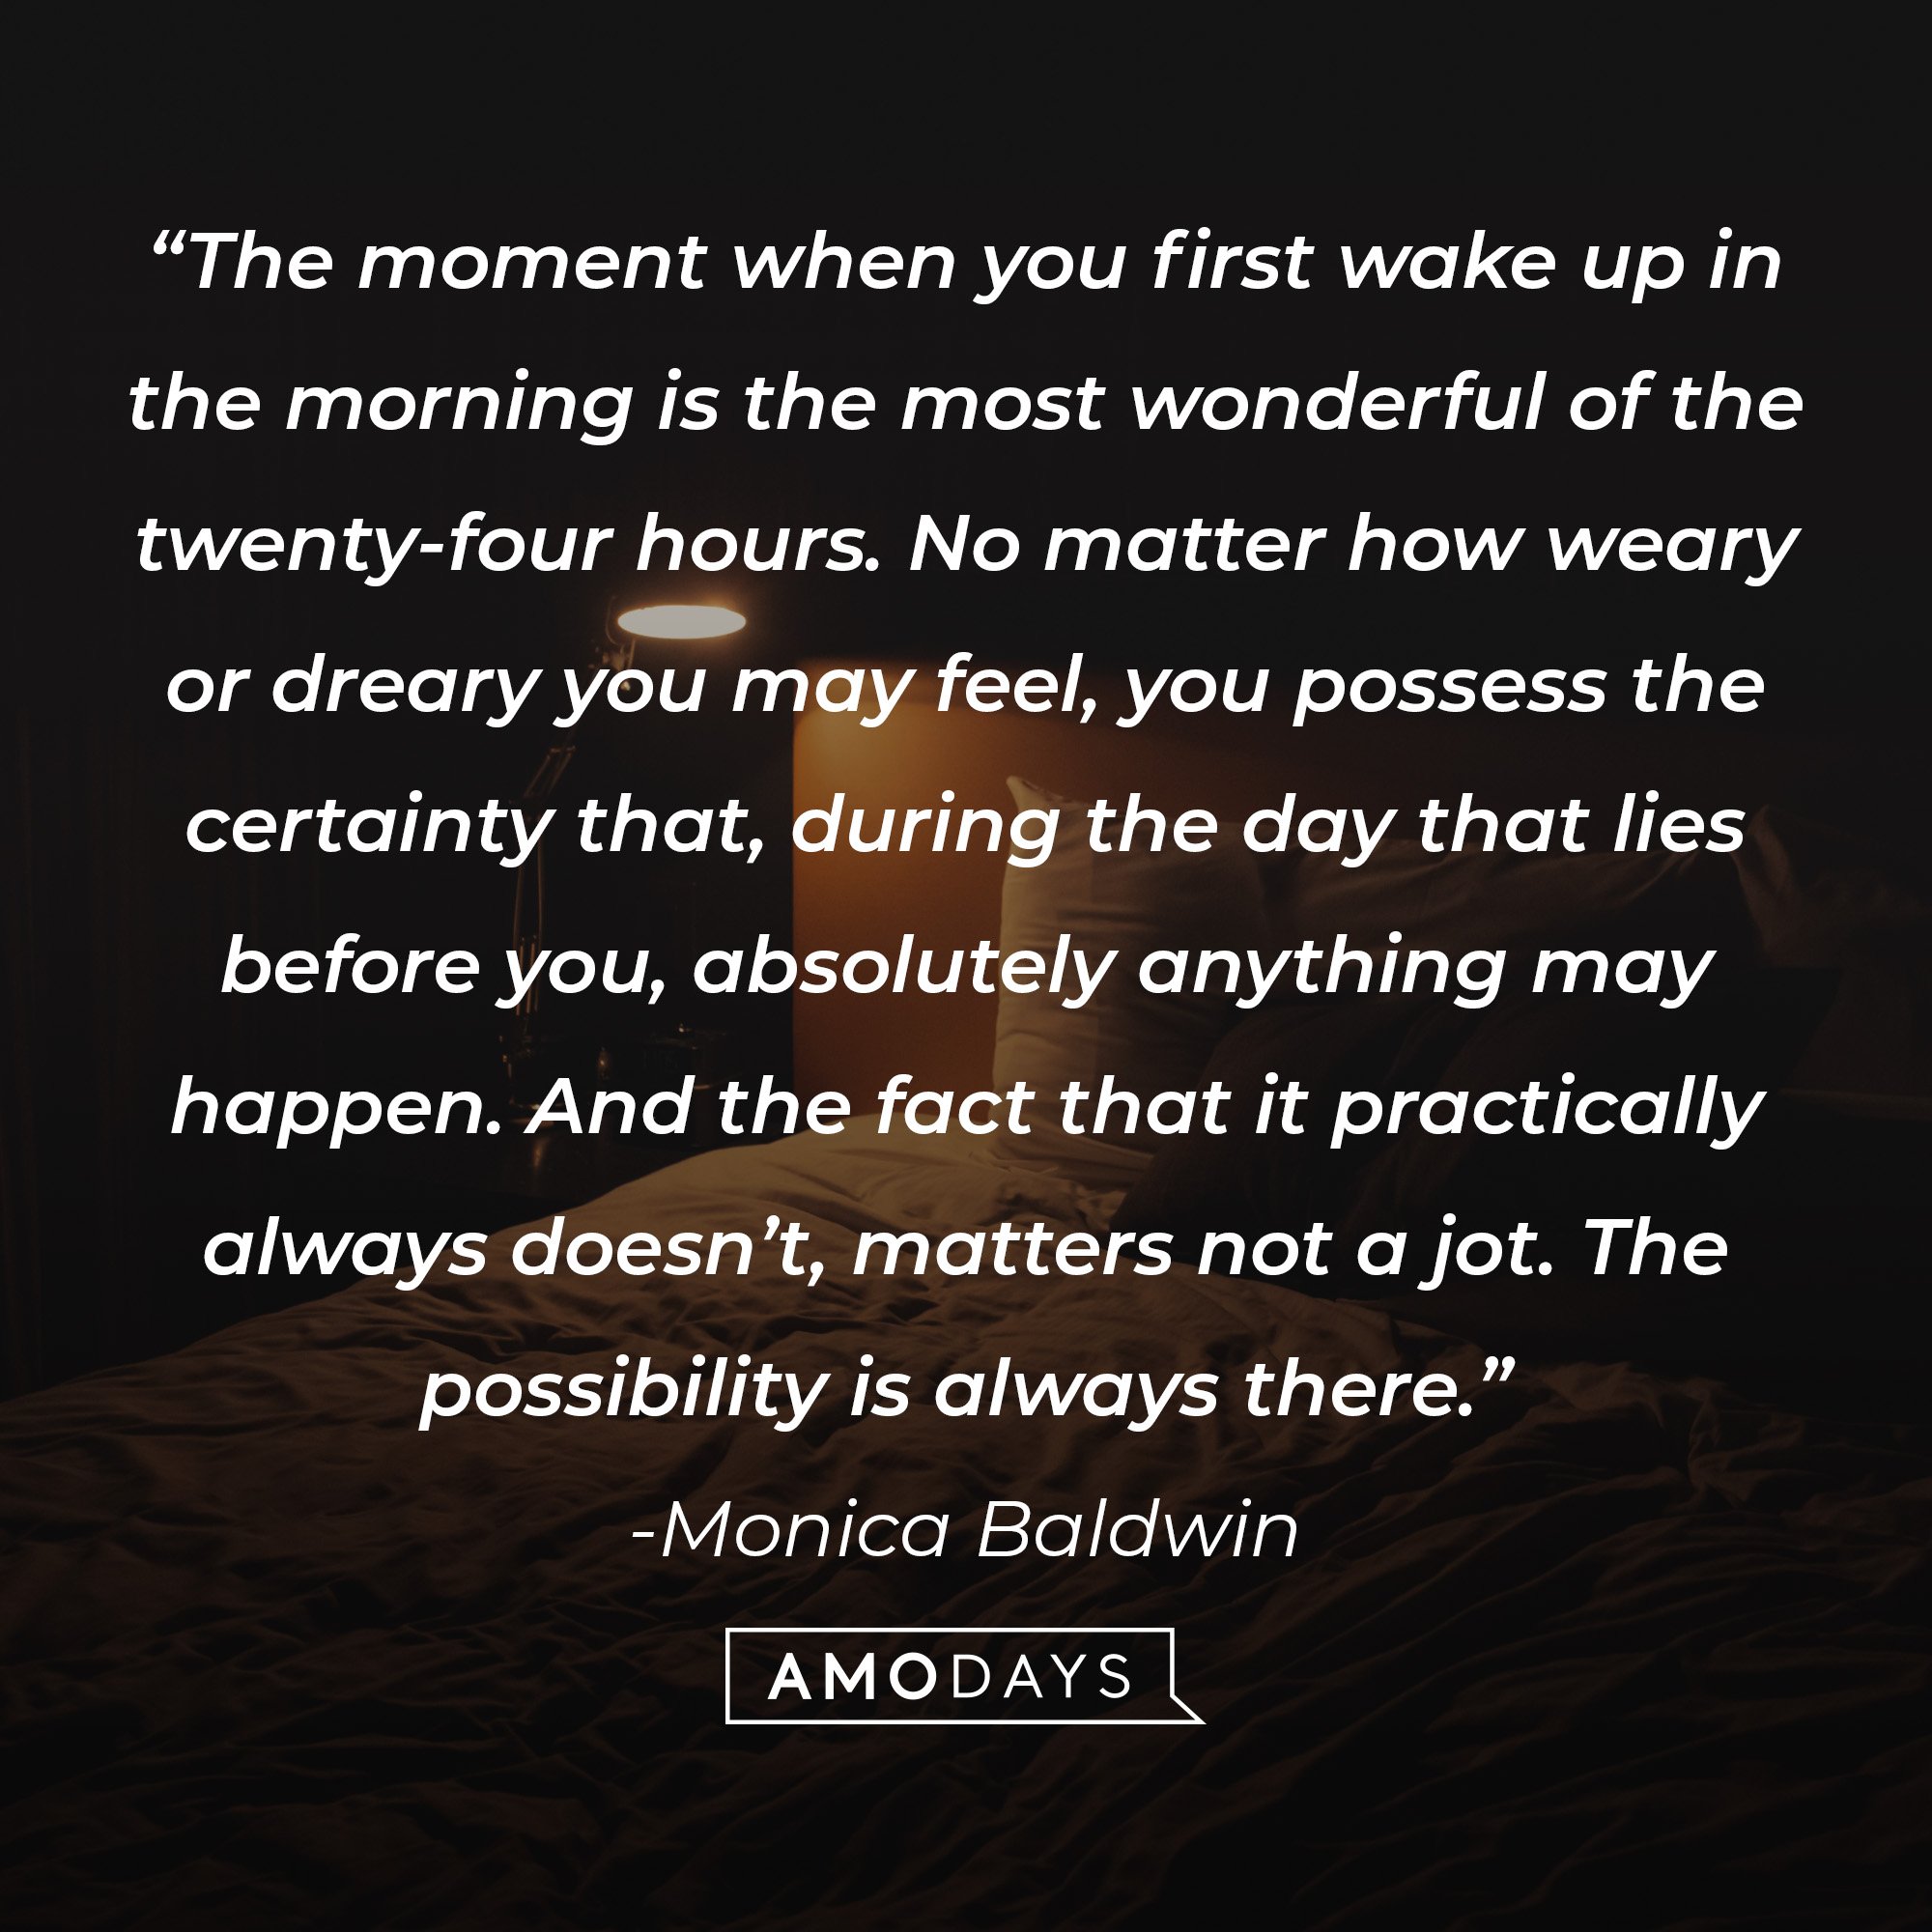 Monica Baldwin's quote:“The moment when you first wake up in the morning is the most wonderful of the twenty four hours. No matter how weary or dreary you may feel, you possess the certainty that, during the day that lies before you, absolutely anything may happen. And the fact that it practically always doesn’t, matters not a jot. The possibility is always there.” | Image: AmoDays 